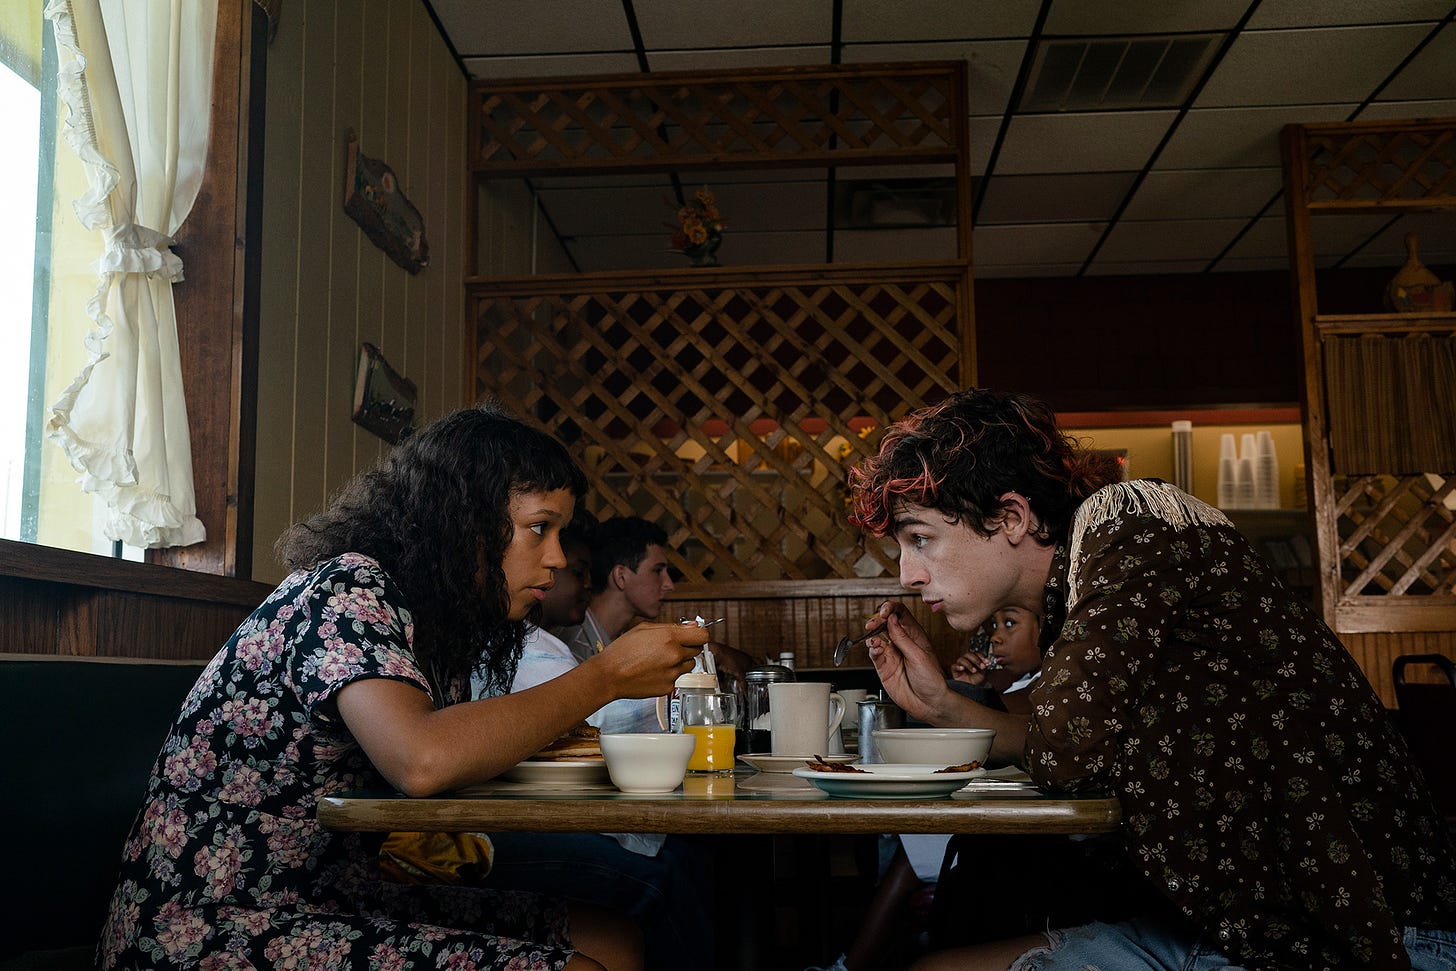 BONES AND ALL film still picturing Taylor Russell and Timothée Chalamet eating at a diner table.